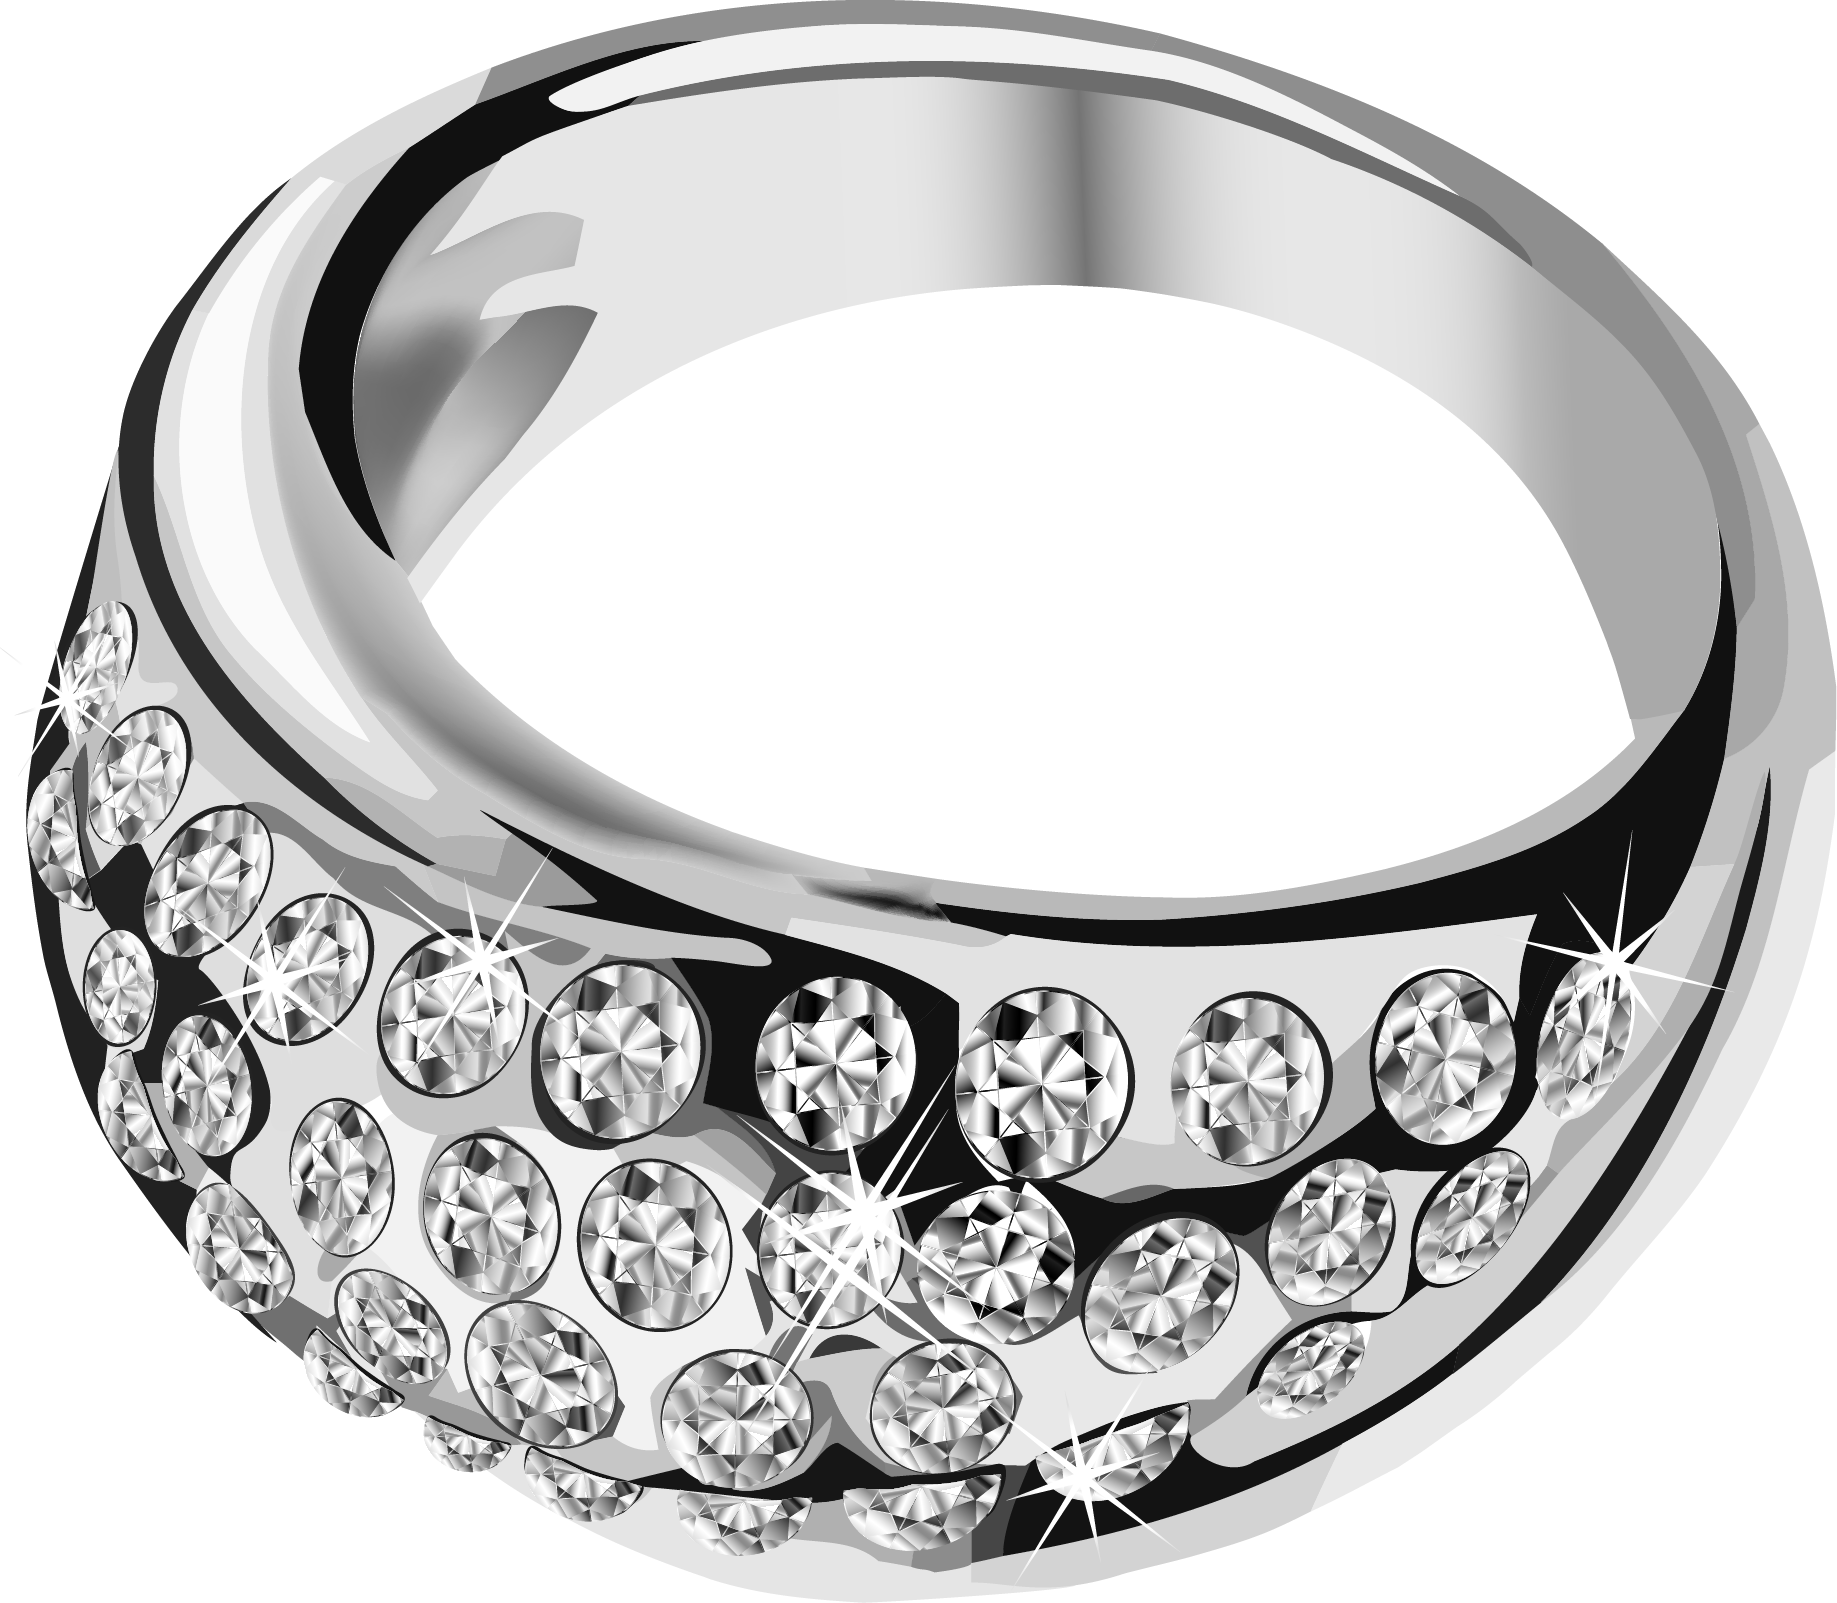 Silver Ring With Diamond PNG Image - PurePNG | Free transparent CC0 PNG Image Library